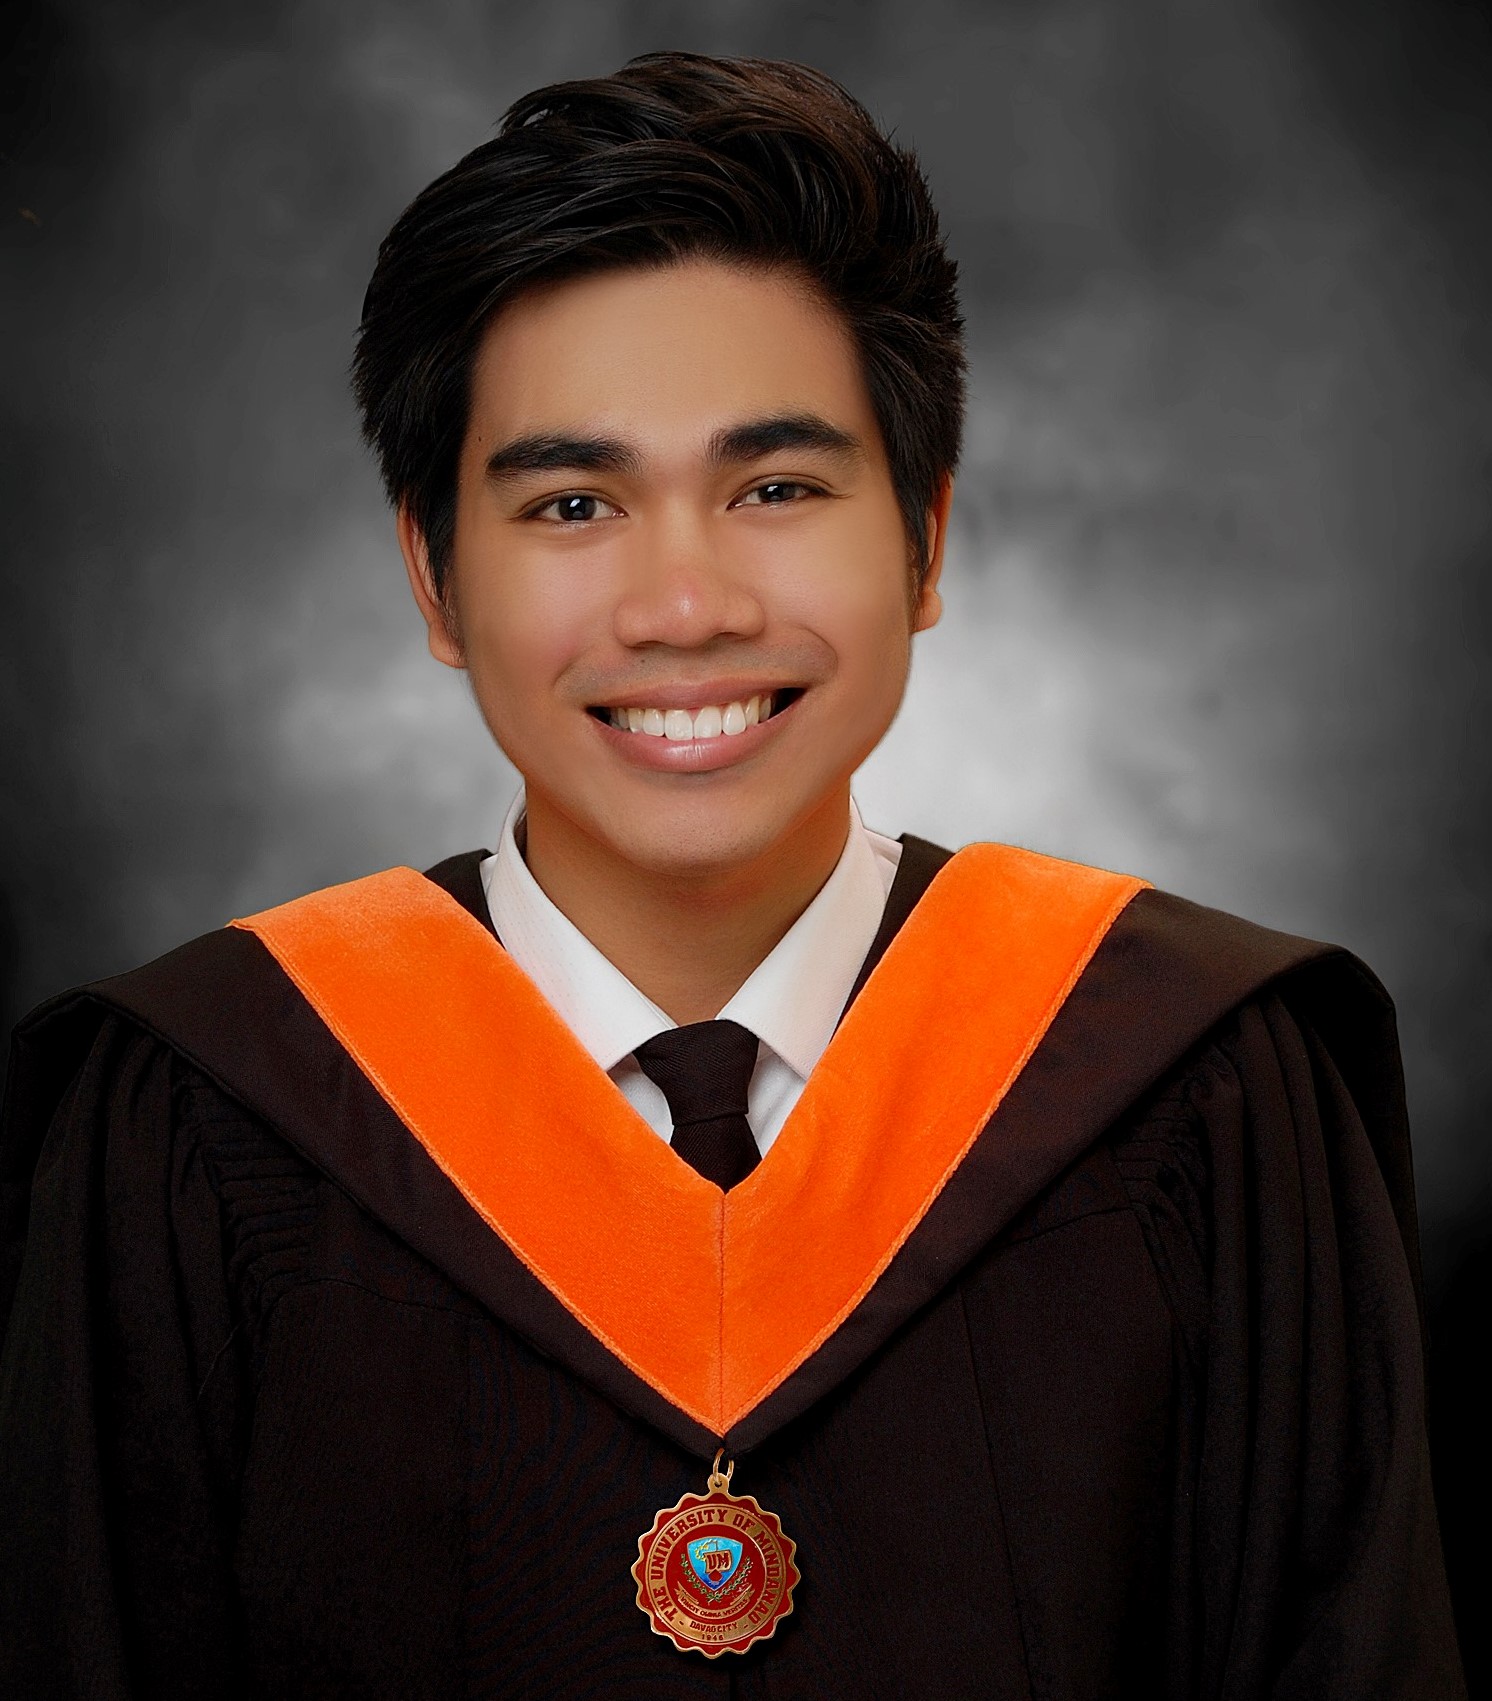 UMian places fifth in Chemical Engineer licensure exam